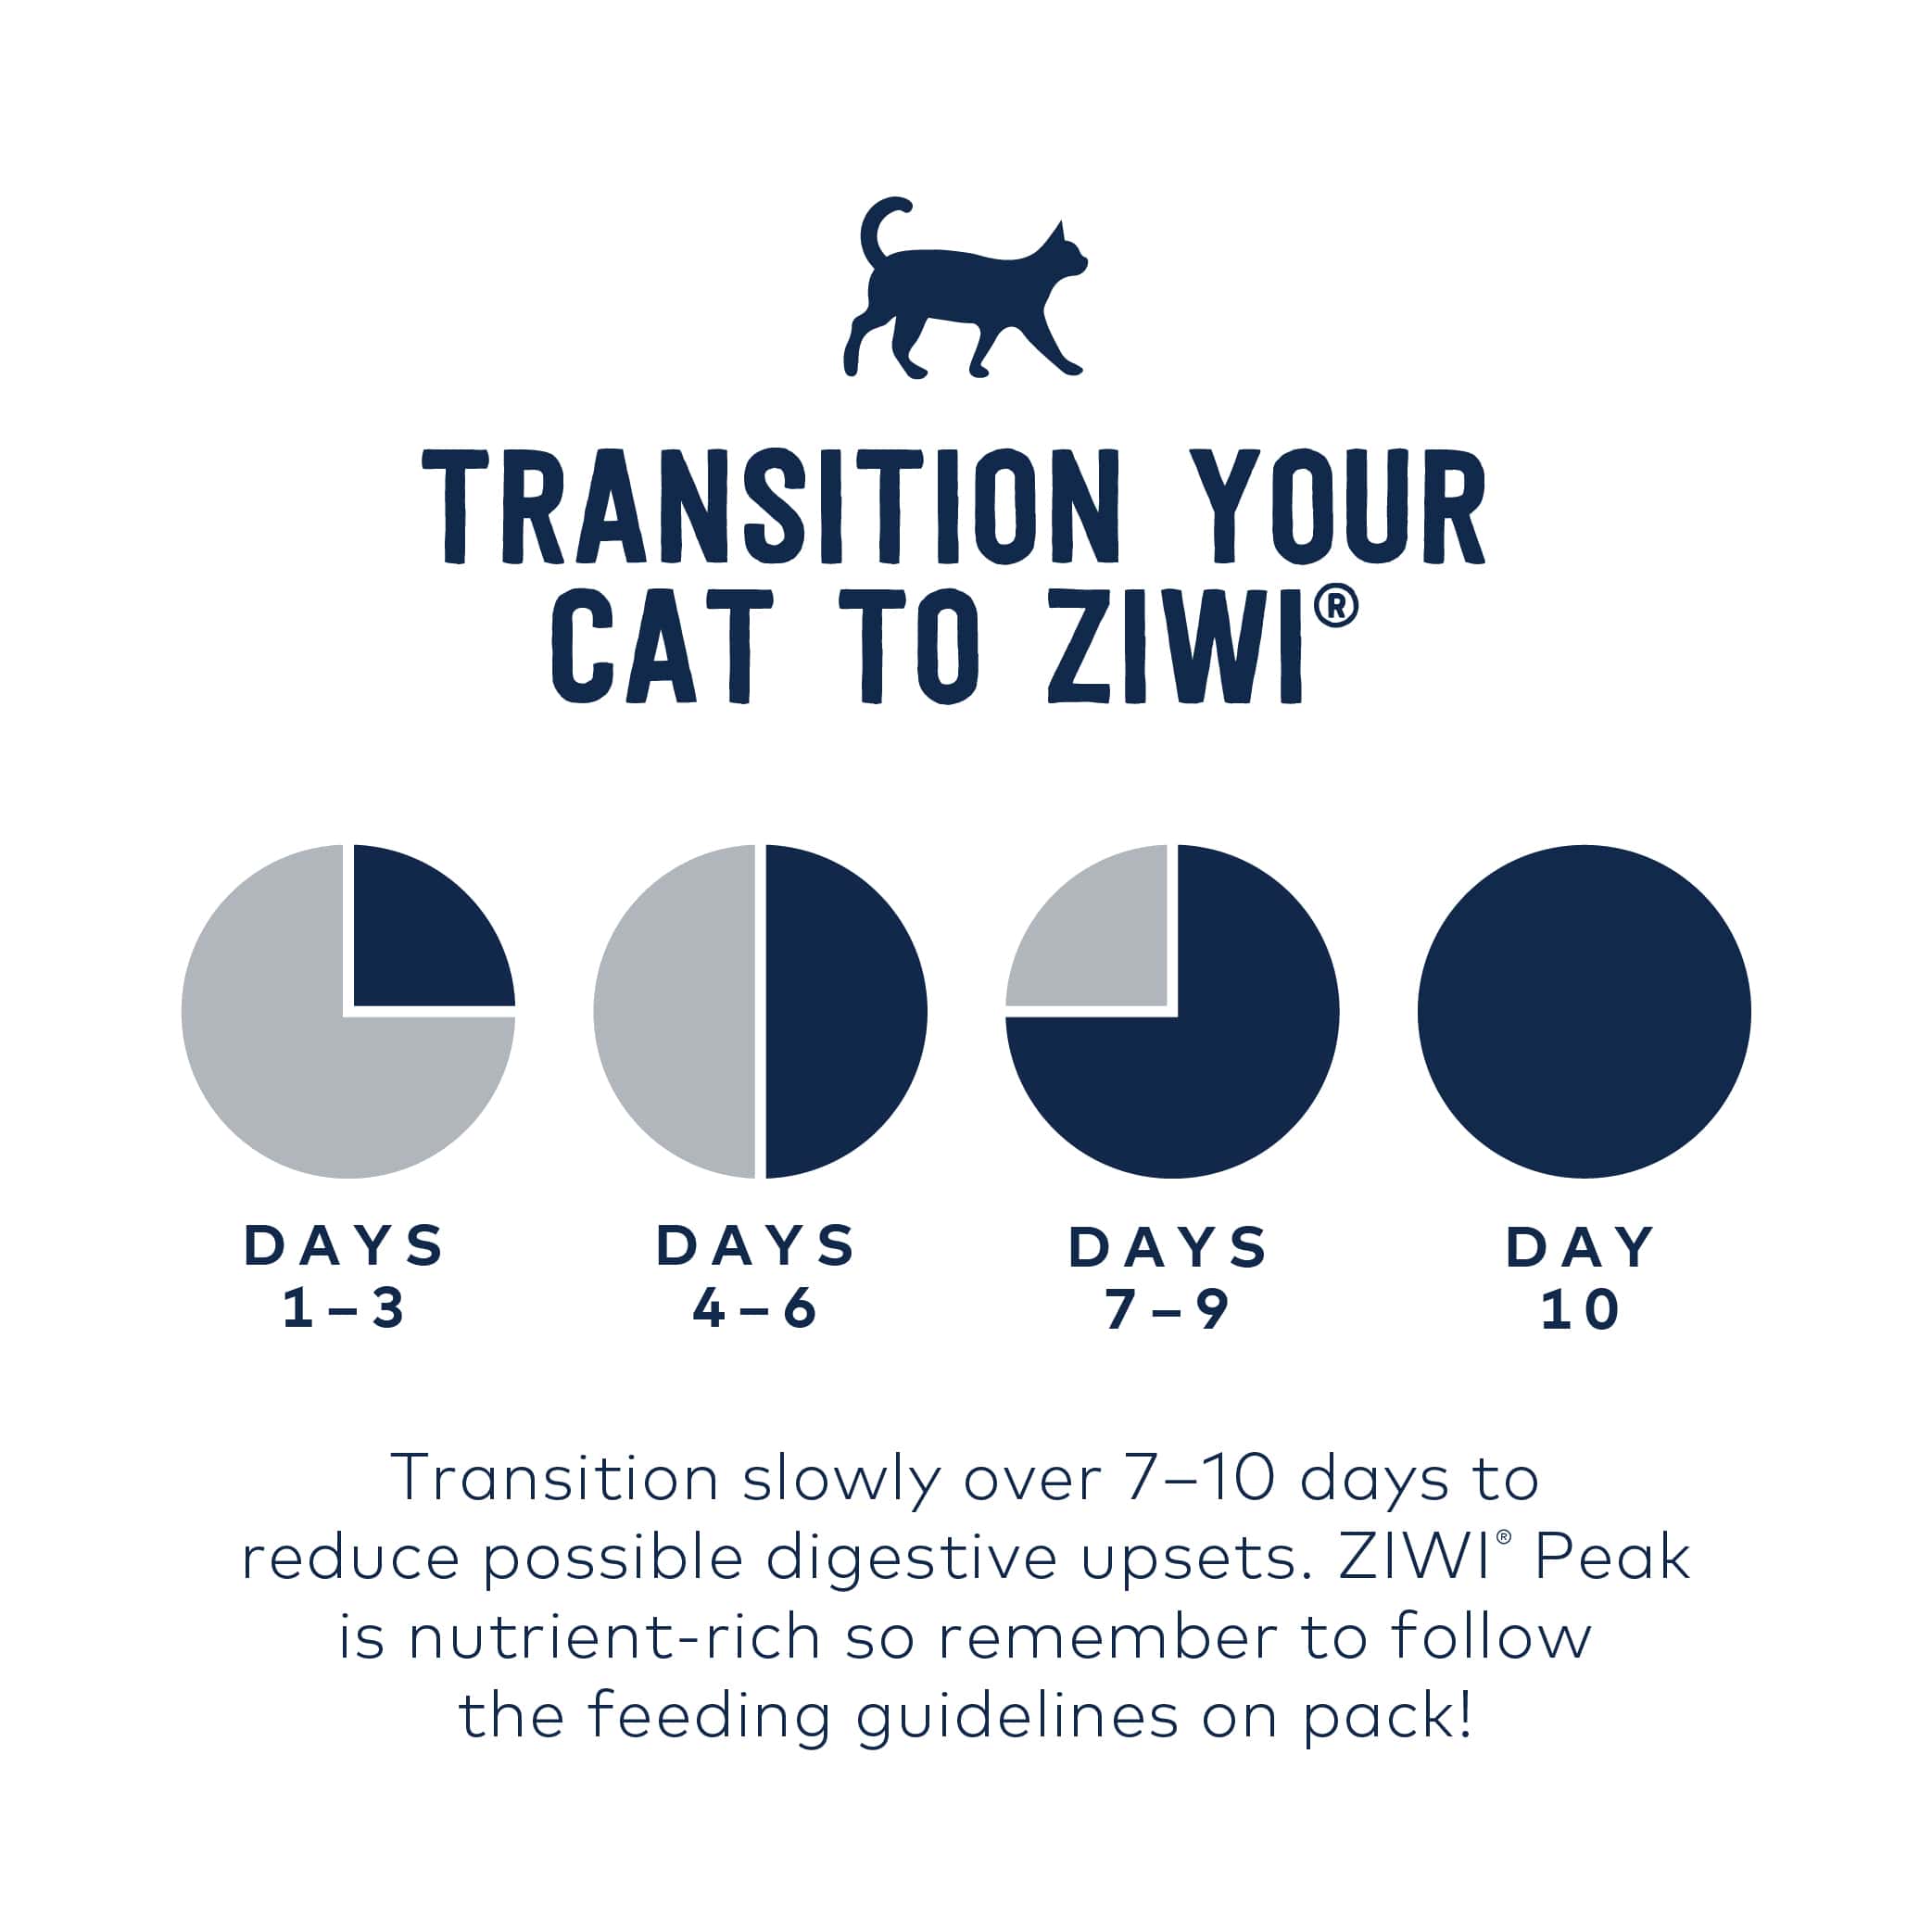 ZIWI Peak Wet Cat Food Mackerel & Lamb. How to Transition Your Cat to ZIWI.